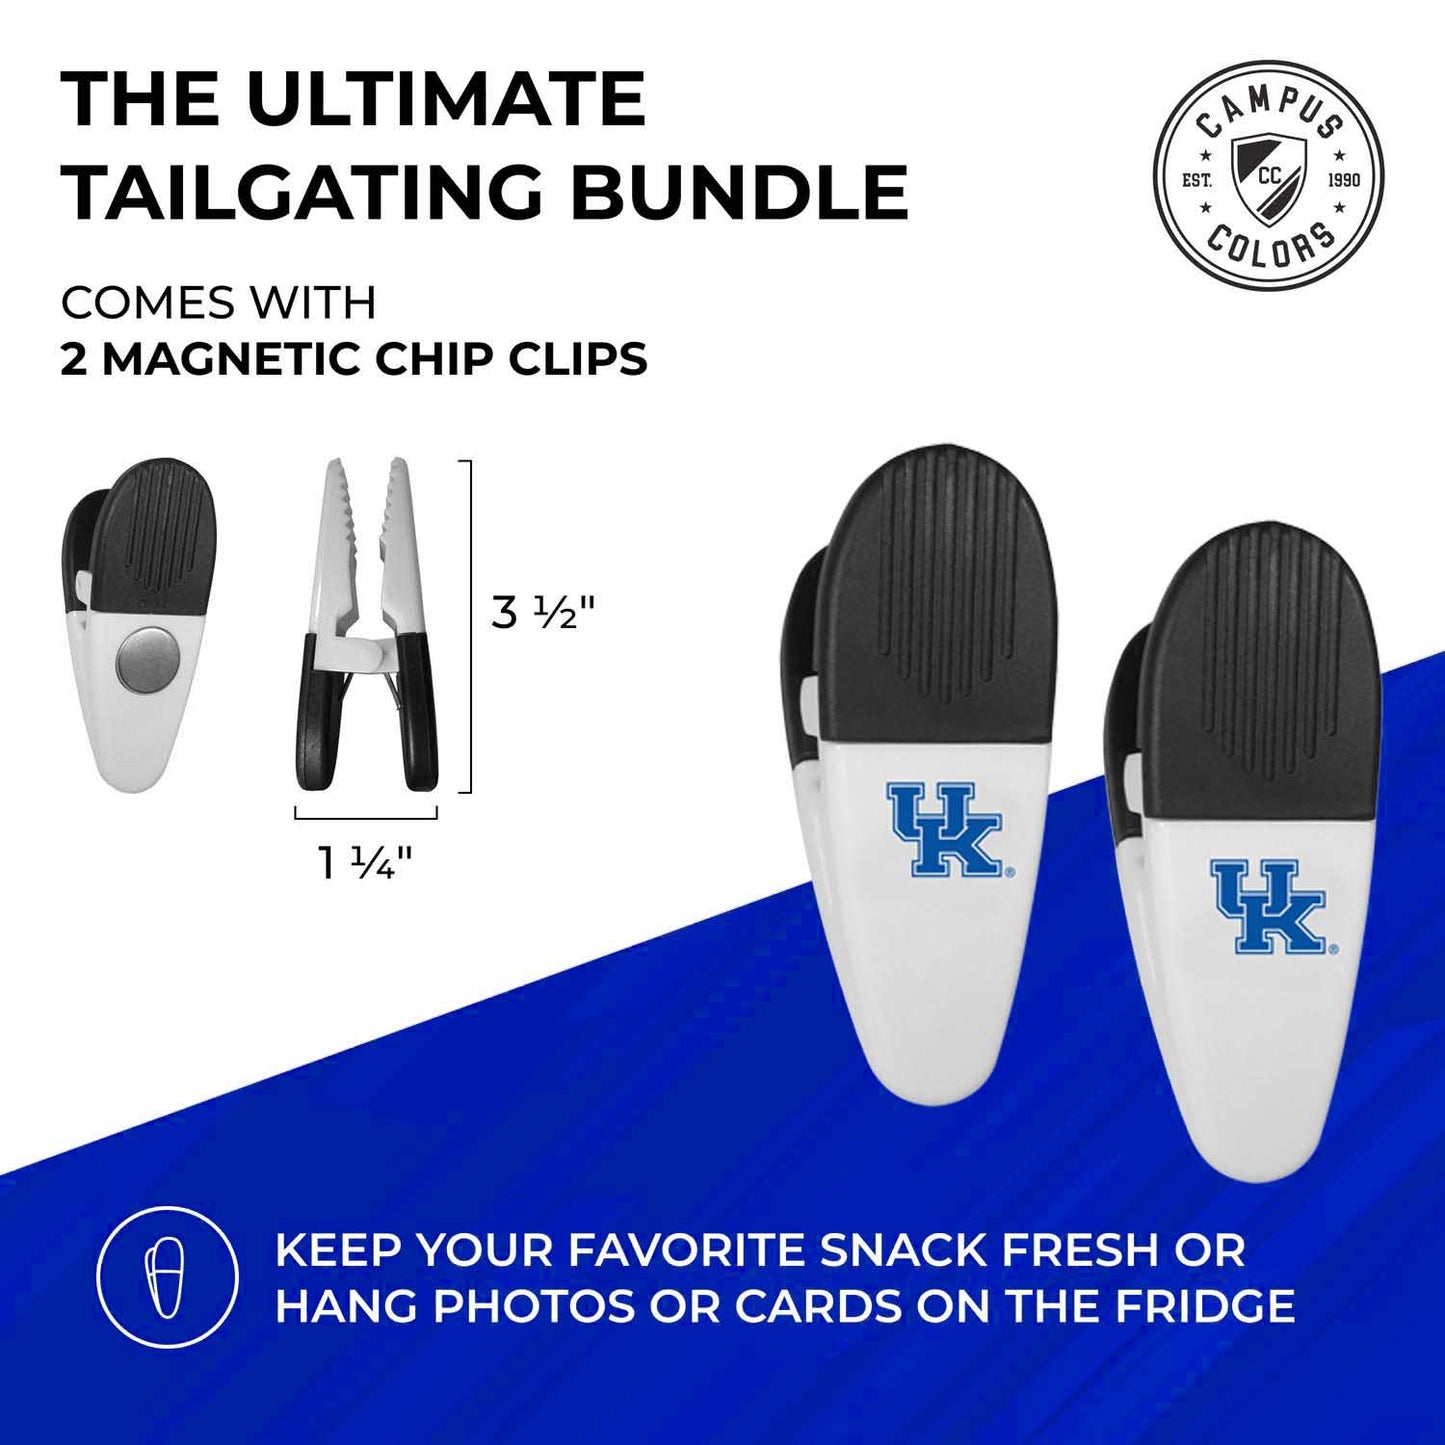 Kentucky Wildcats Collegiate University Two Piece Grilling Tools Set with 2 Magnet Chip Clips - Chrome